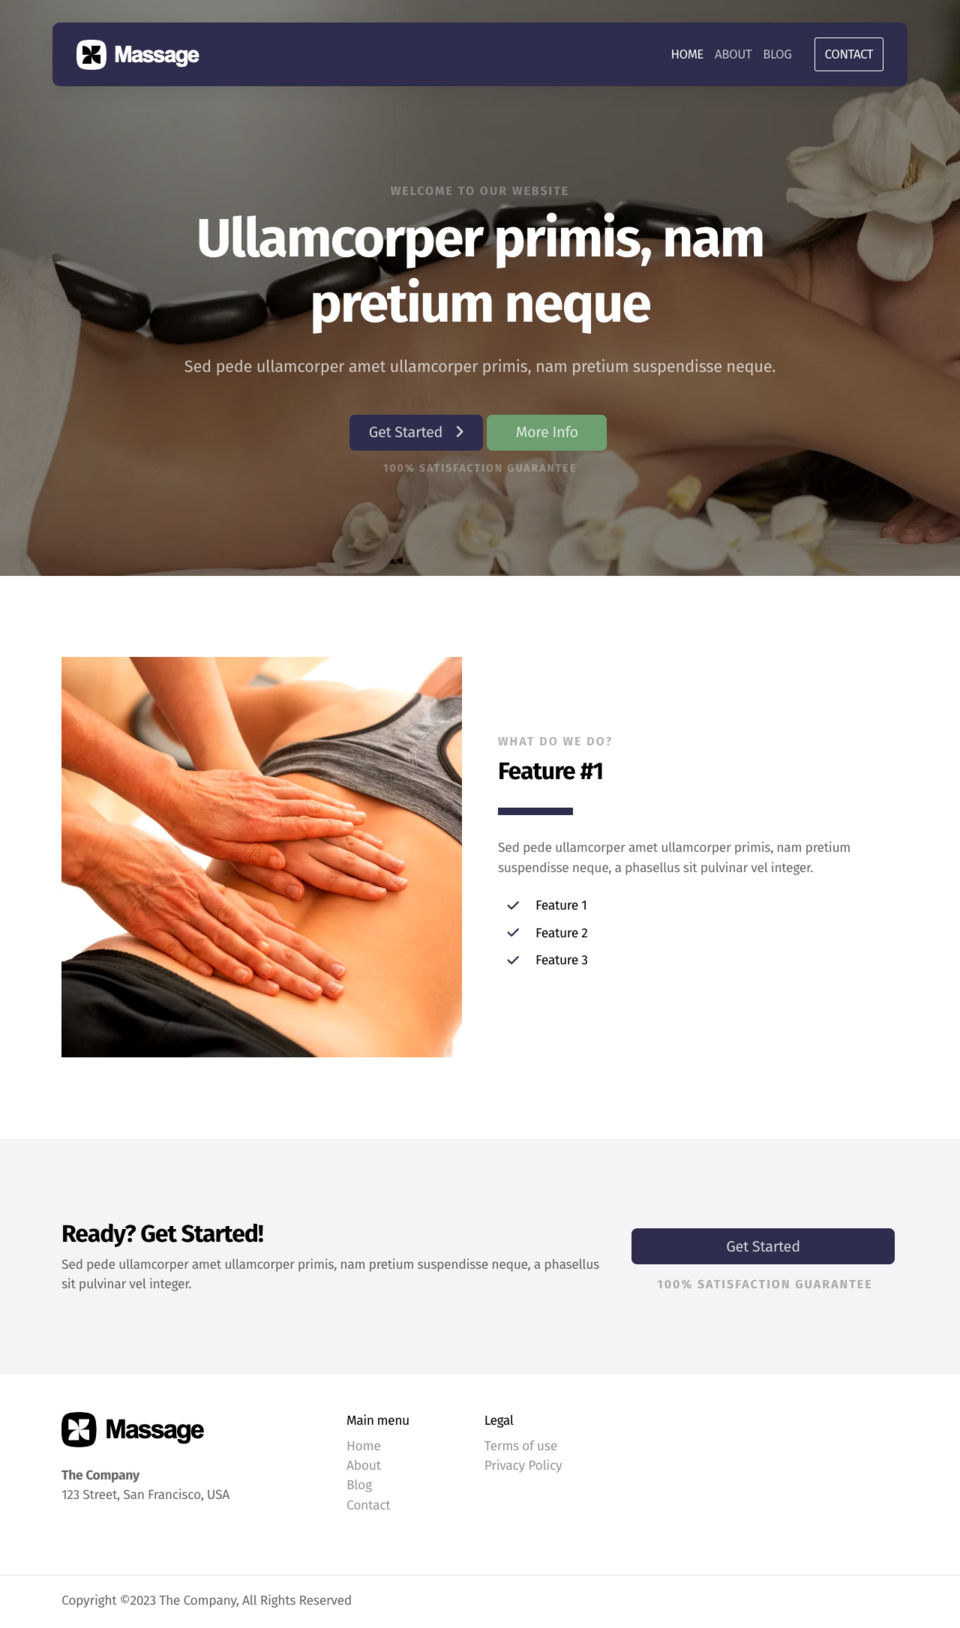 Massage Website Template - Ideal for small businesses in the spa, massage, wellness, and beauty industries